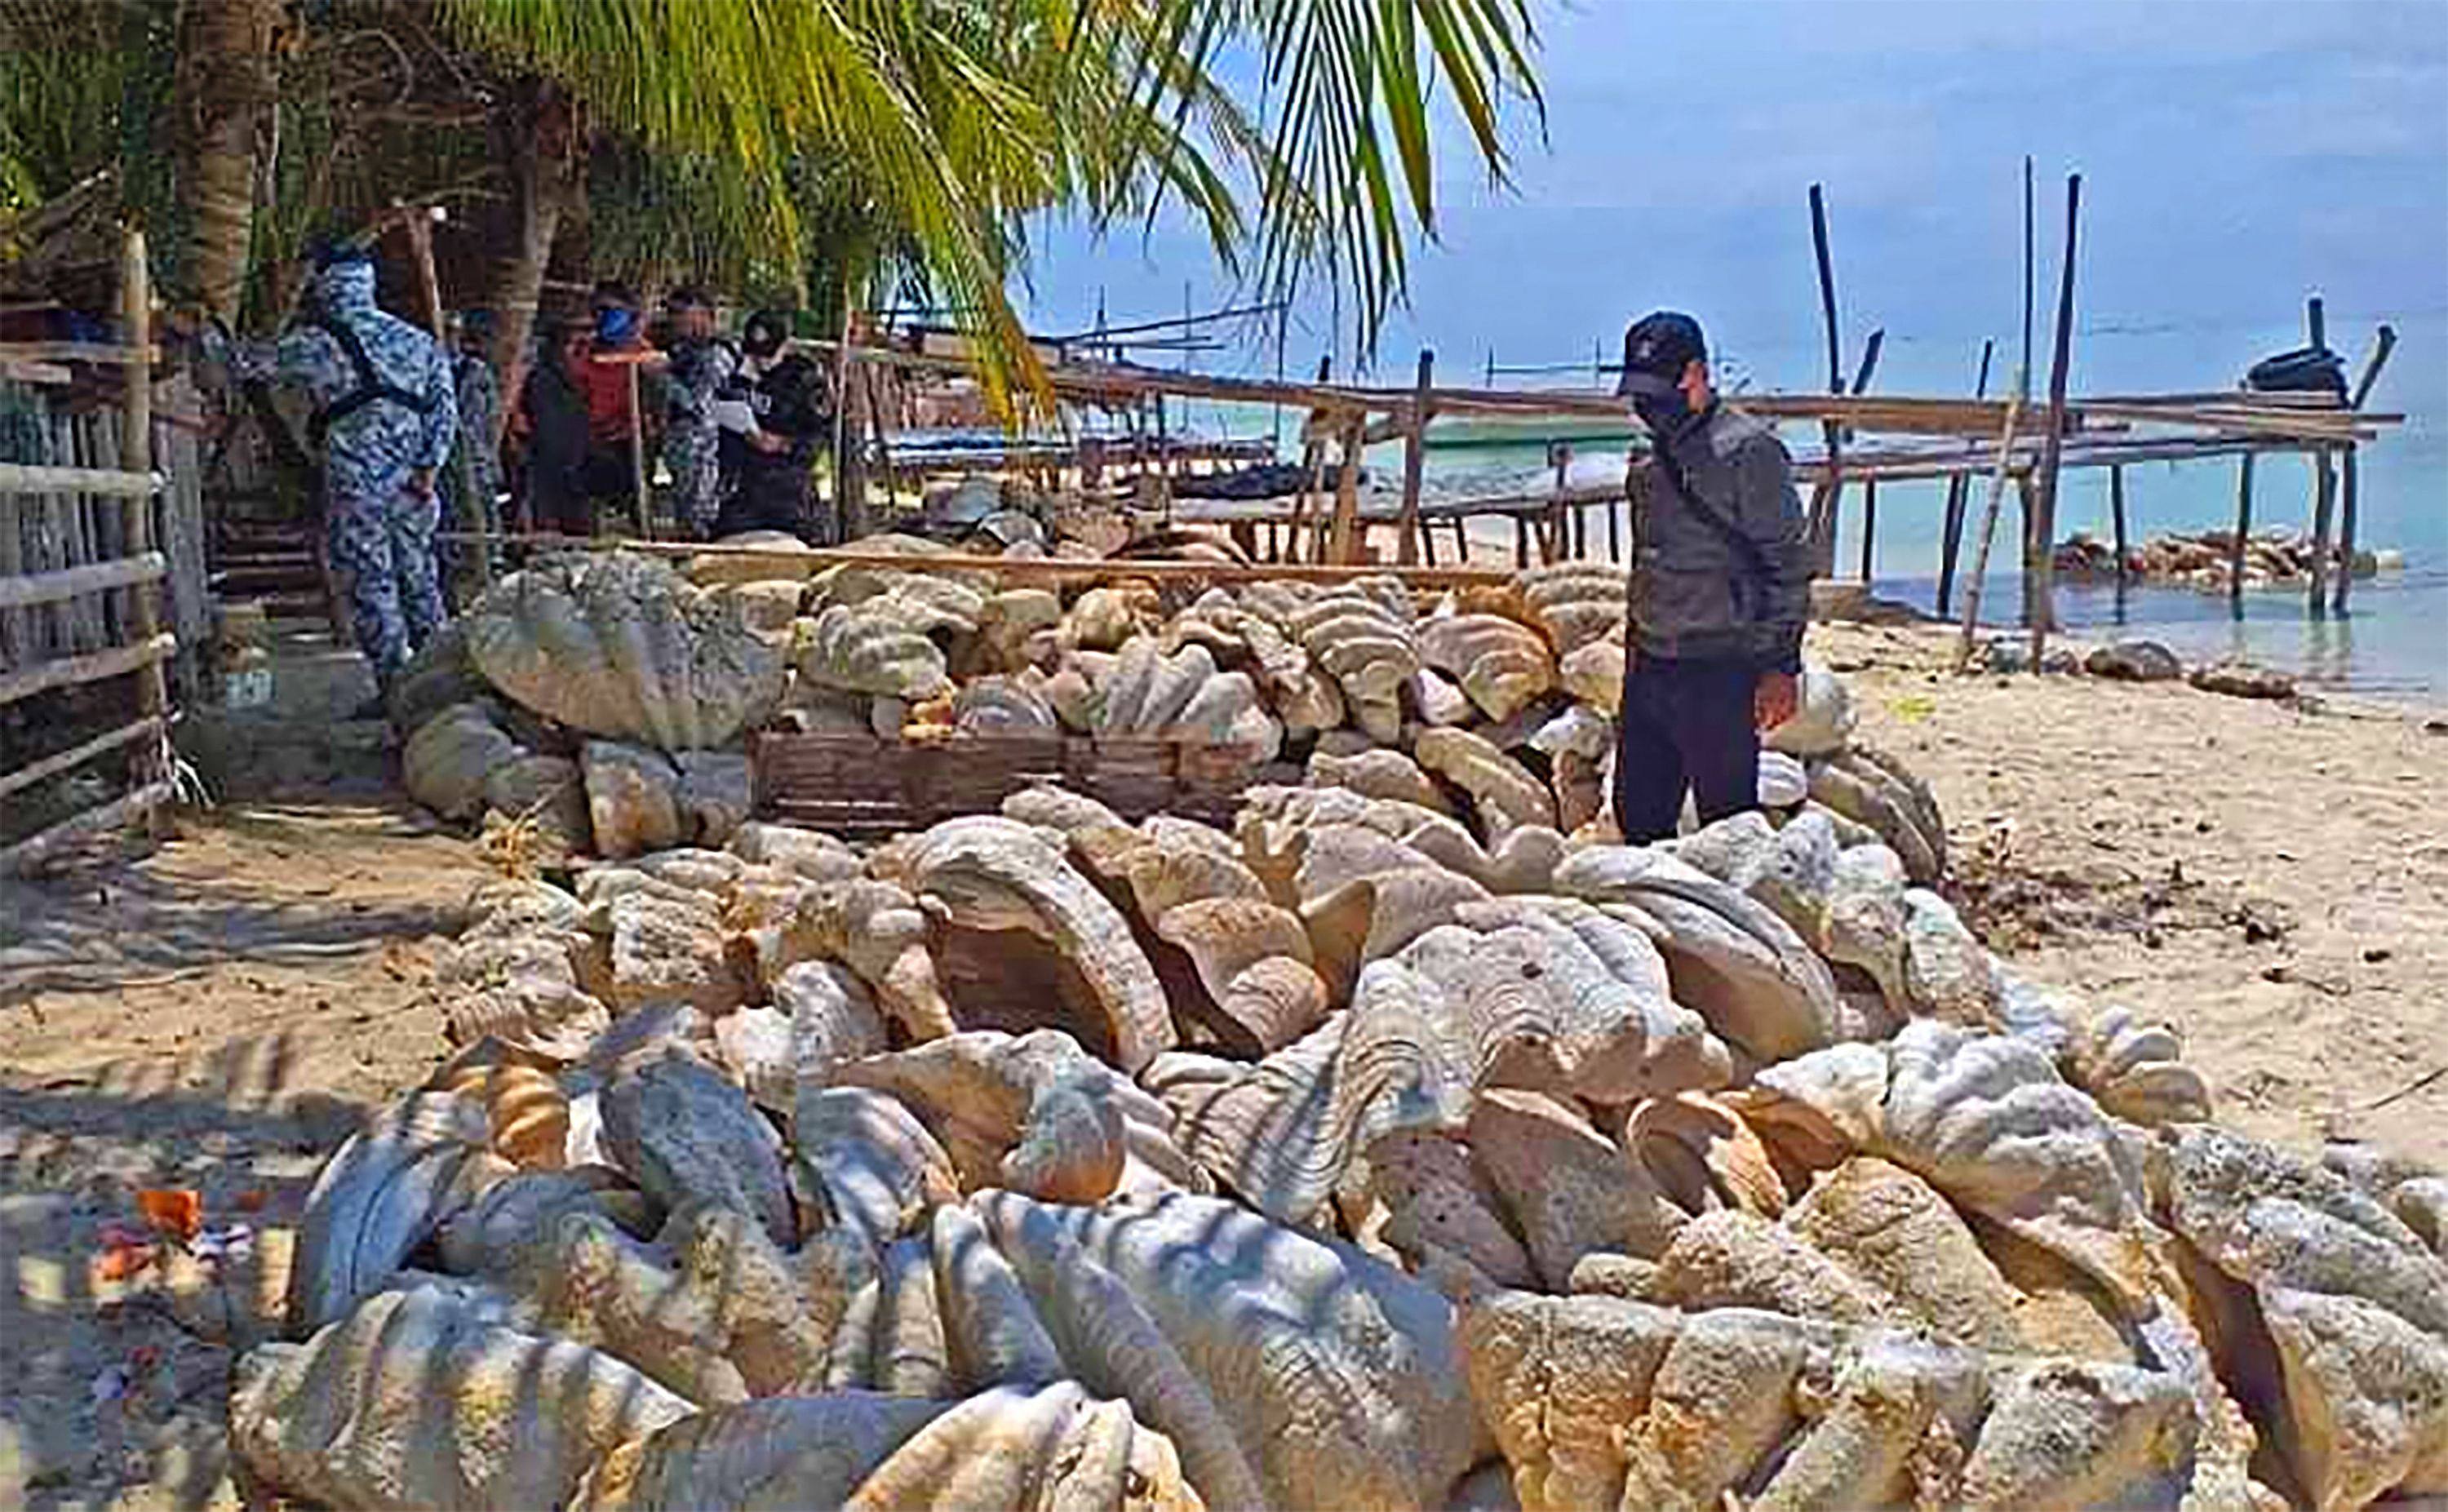 Philippine coastguard personnel inspecting seized giant clam shells in Roxas town, Palawan province on April 16, 2021. Photo: AFP